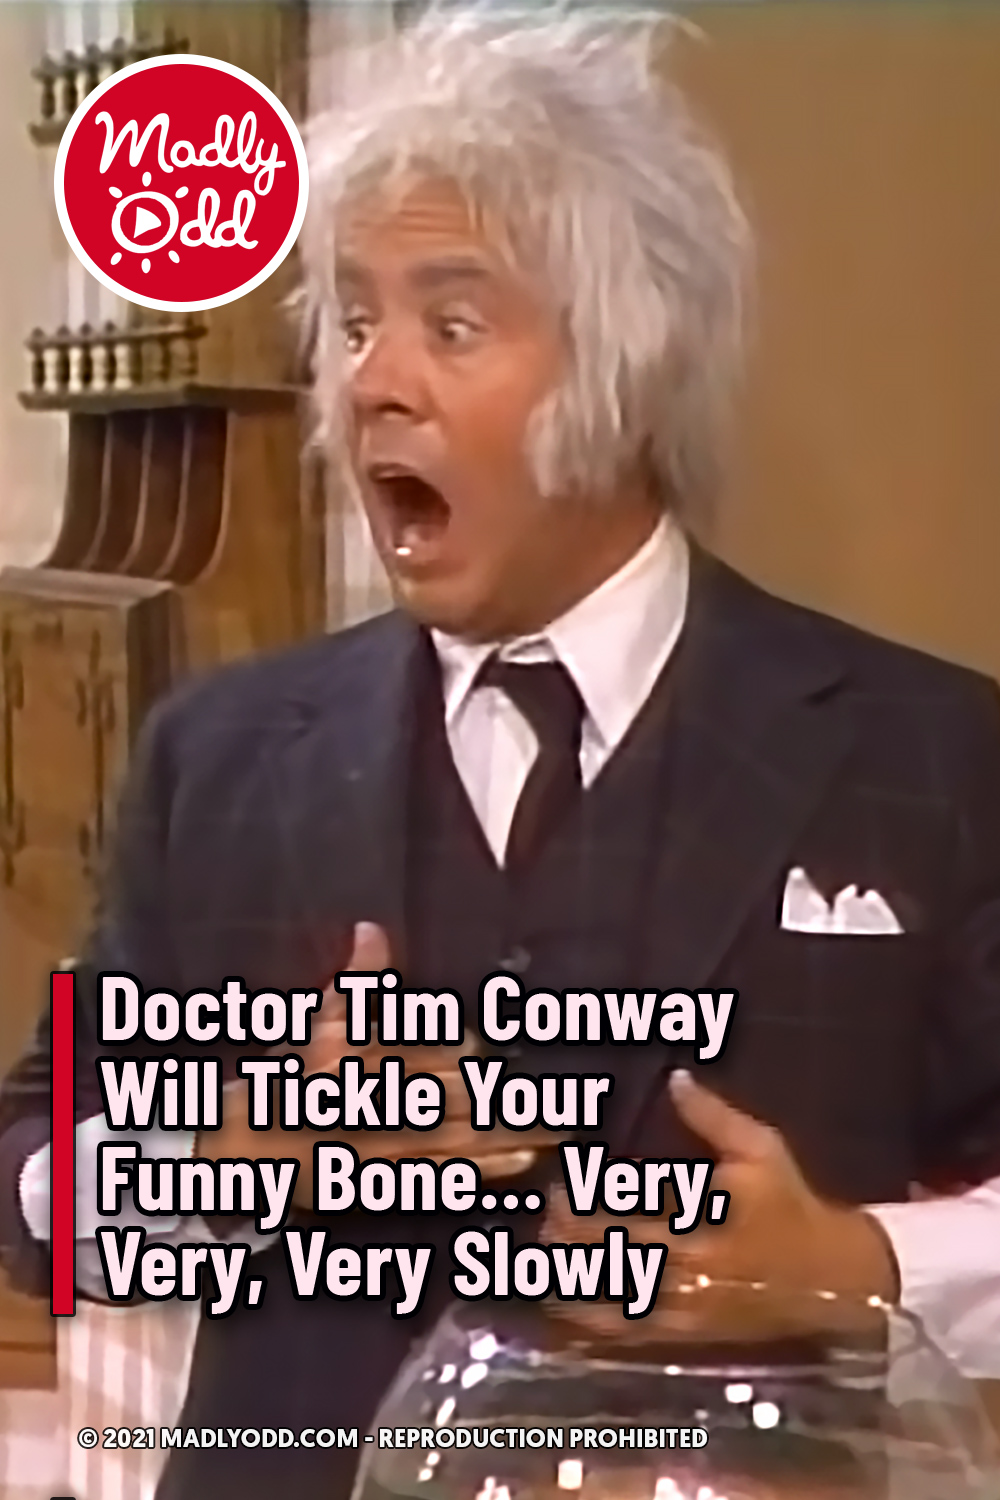 Doctor Tim Conway Will Tickle Your Funny Bone... Very, Very, Very Slowly